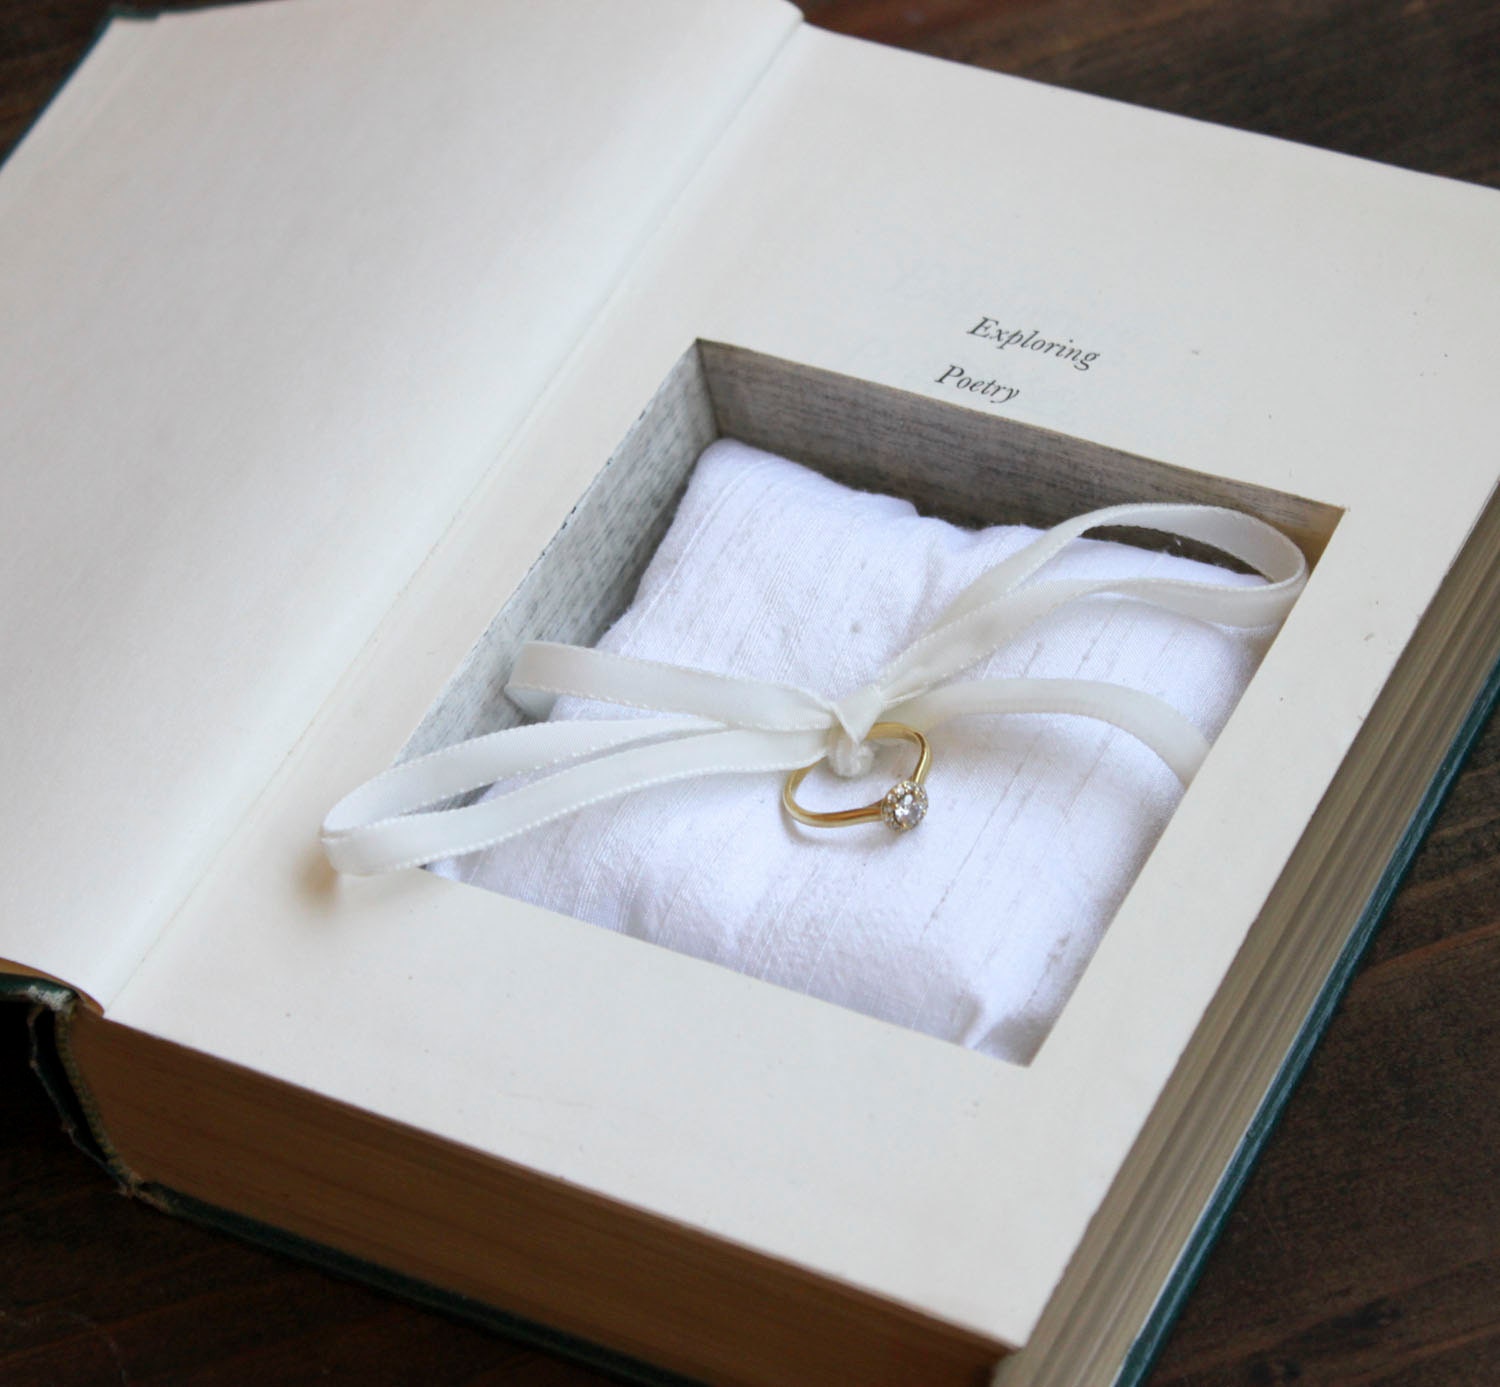 book and ring